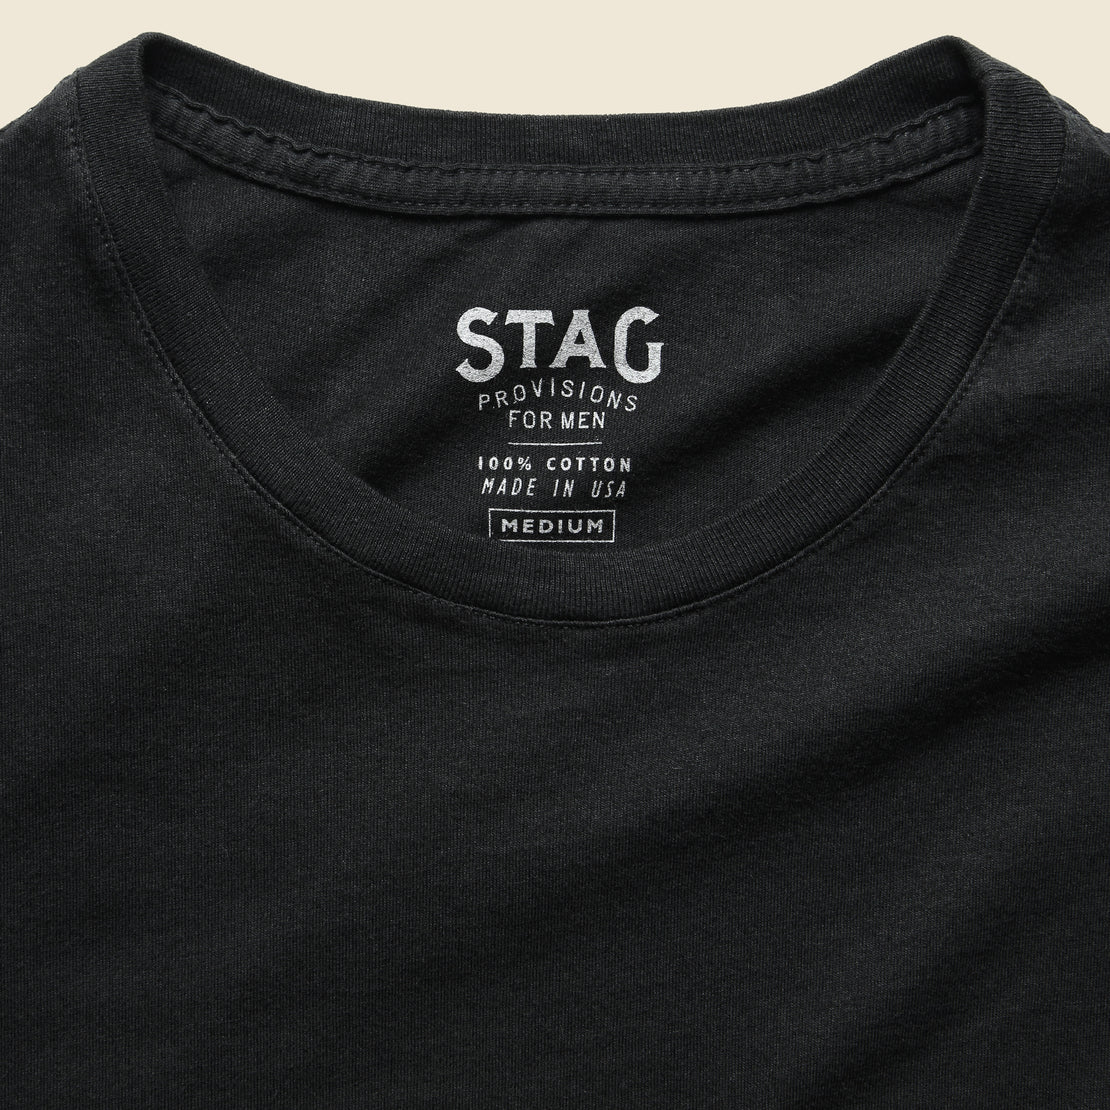 Pocket Tee - Black - STAG - STAG Provisions - Tops - S/S Tee